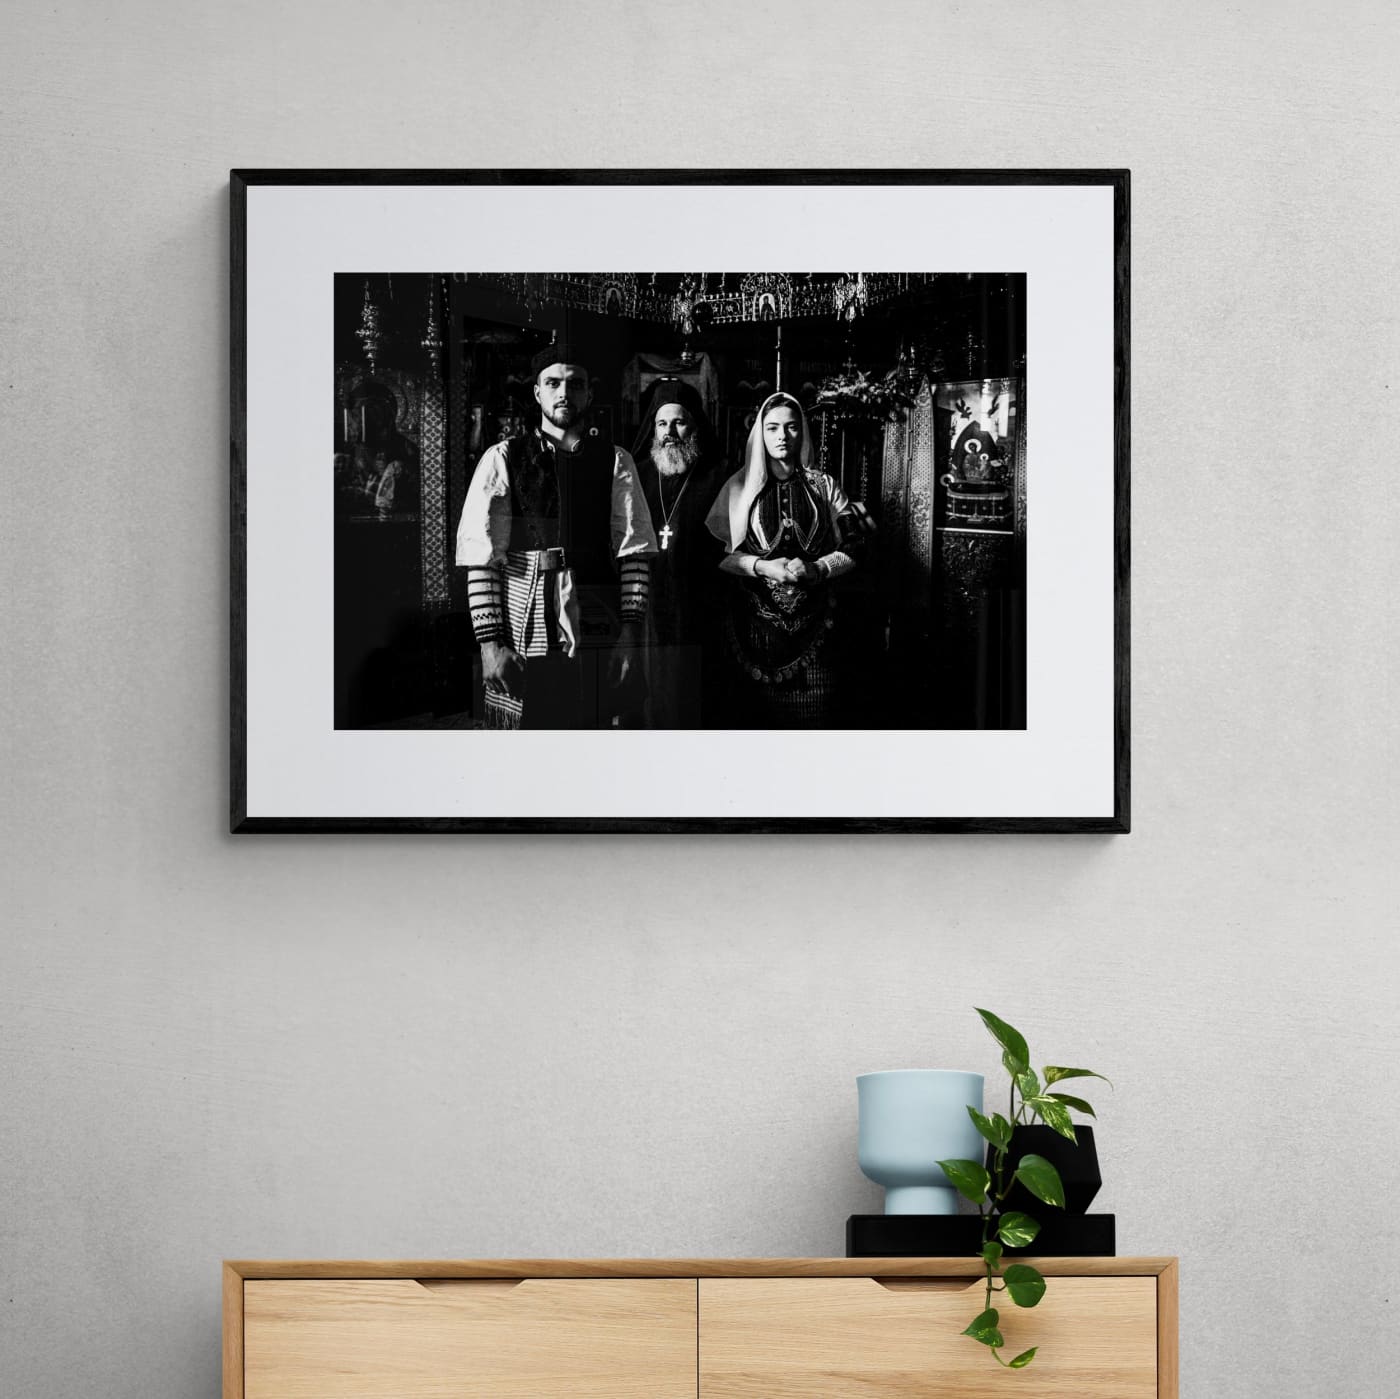 Black and White Photography Wall Art Greece | Costumes of Kladorachi with a local priest Florina W. Macedonia by George tatakis - single framed photo